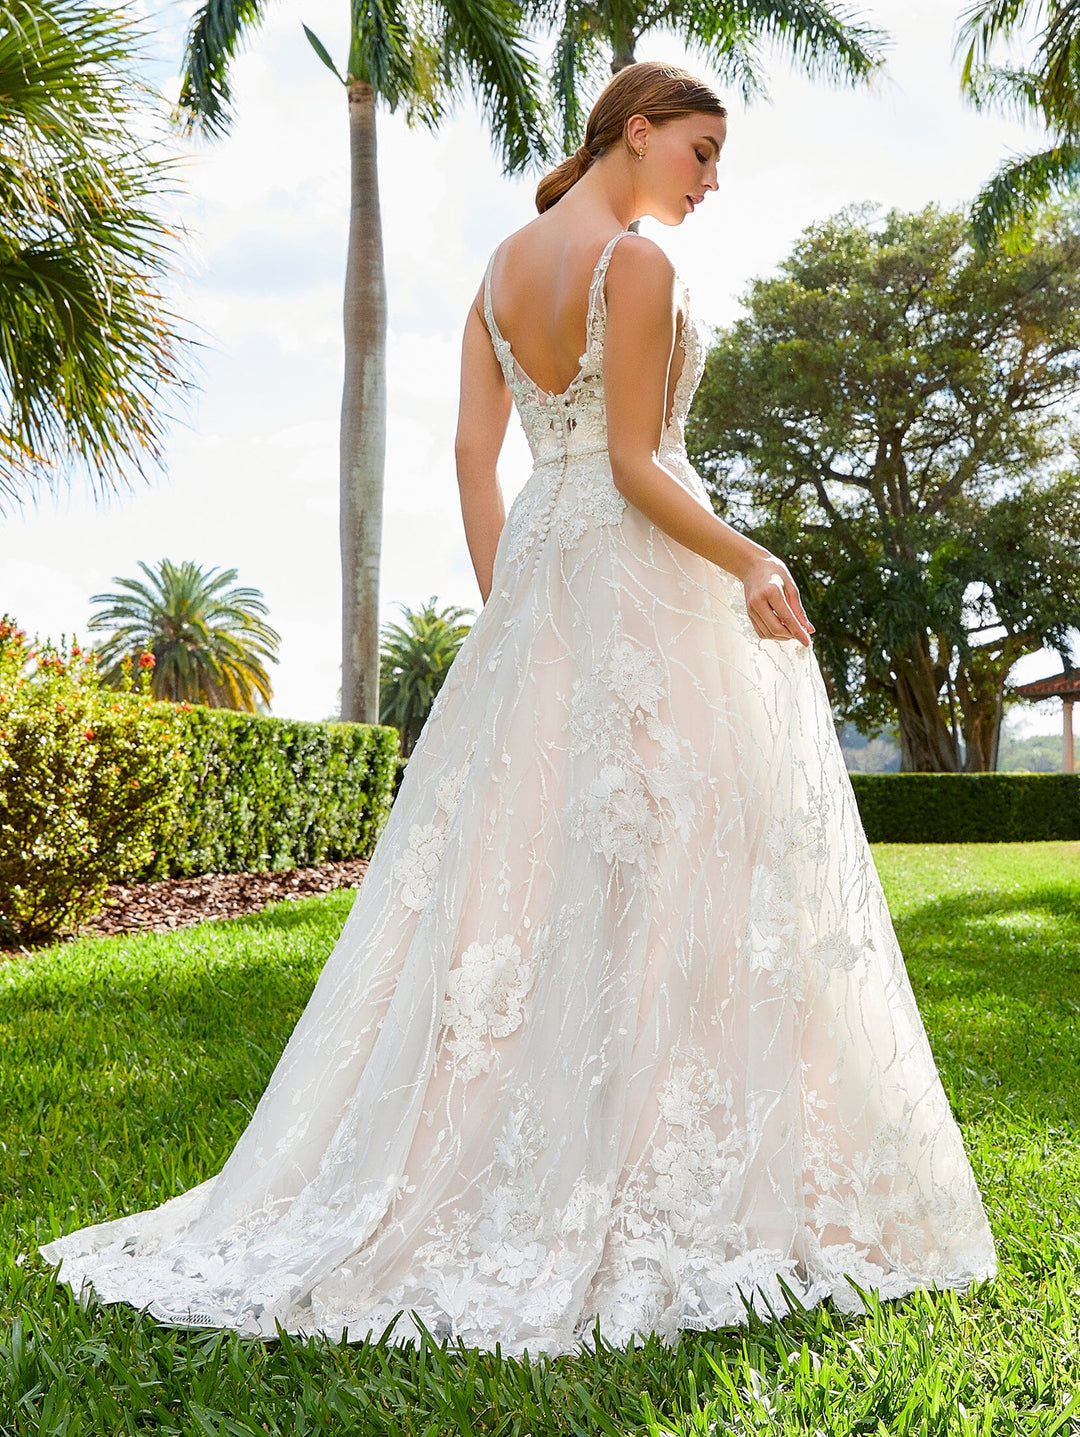 Applique V-Neck Wedding Dress by Adrianna Papell 31076 Louisa